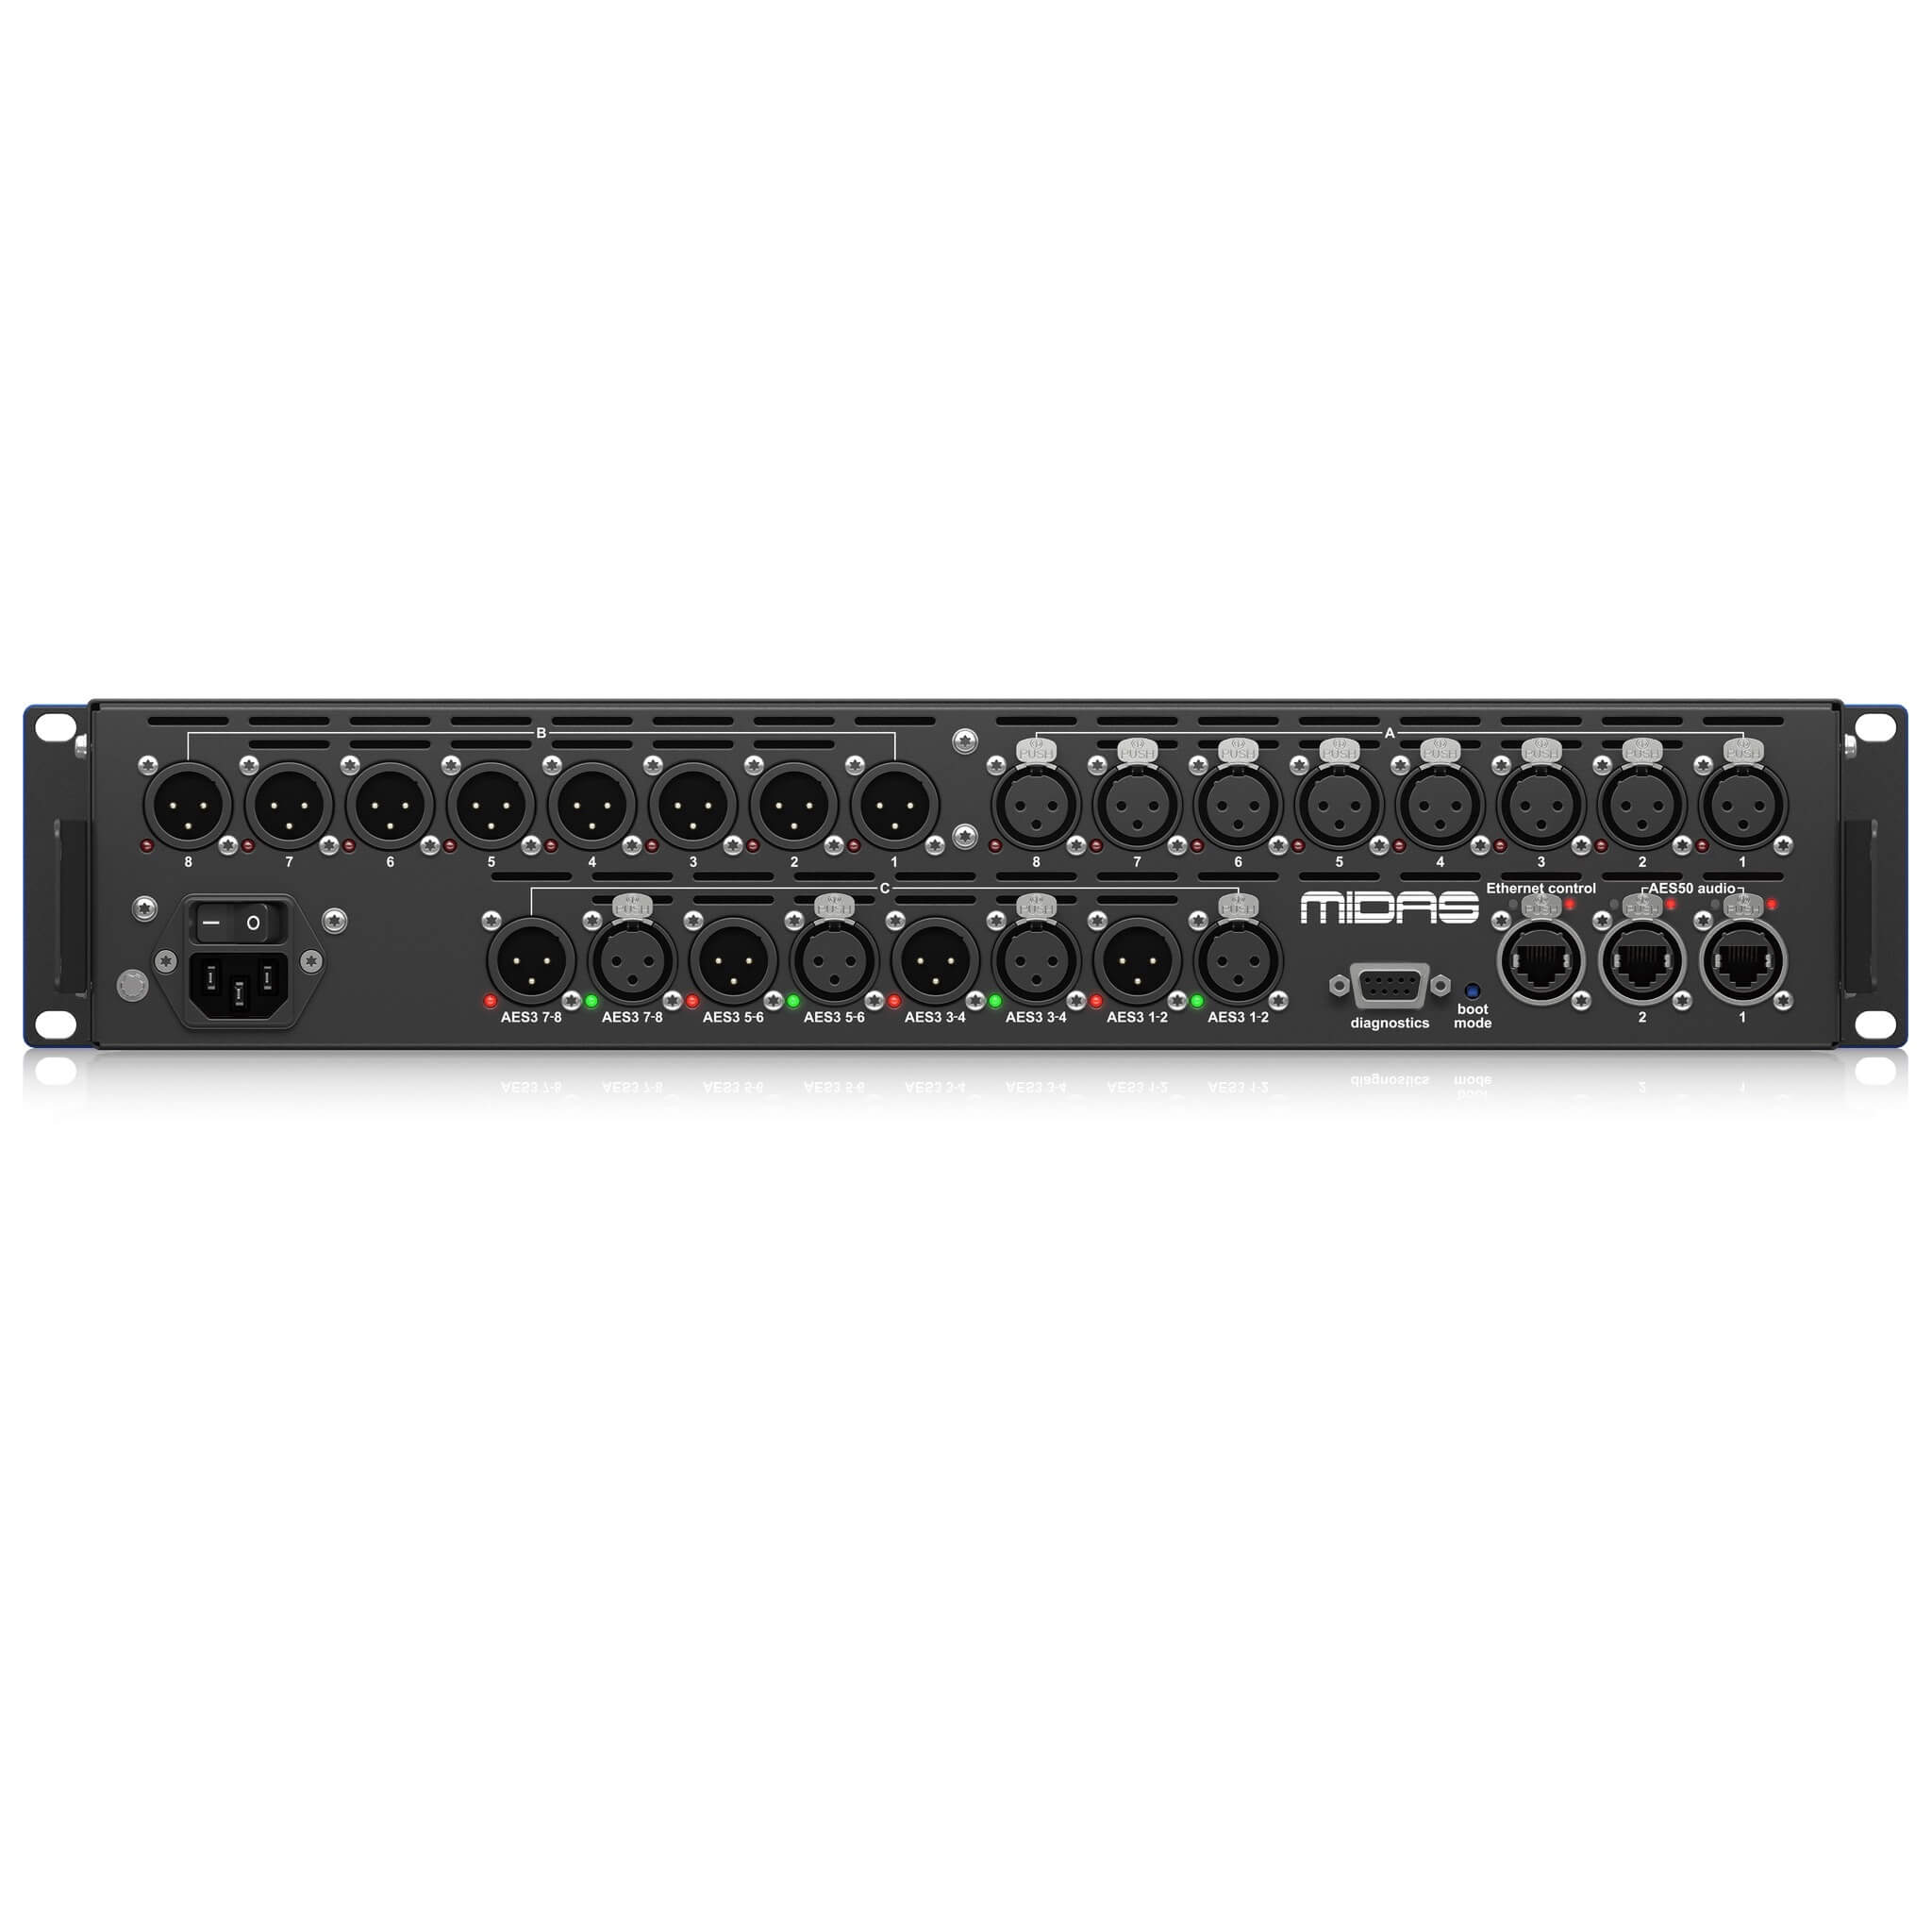 Midas DL155 - 16 Input, 16 Output Stage Box with 8 Midas Mic Preamps, rear